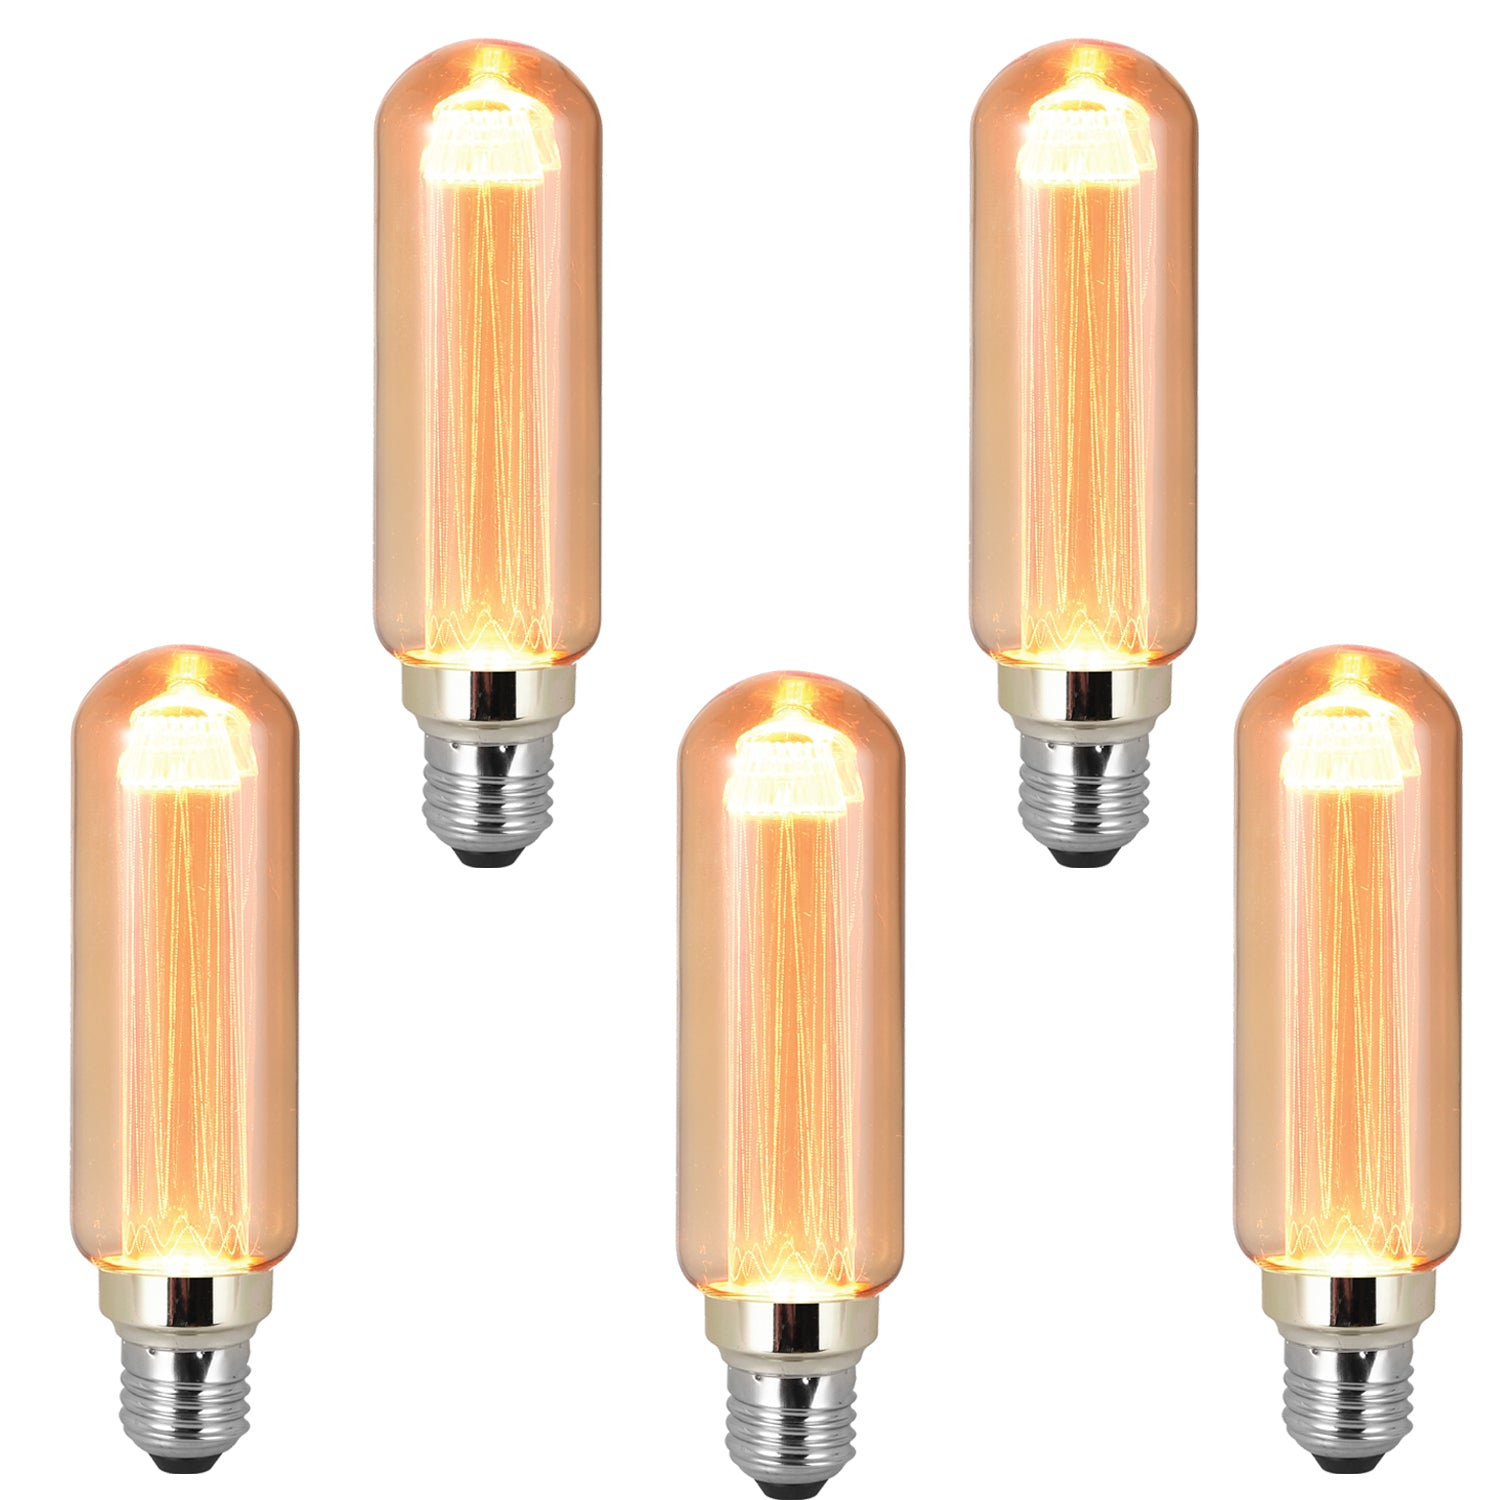  Non Dimmable Bulbs-5 Pack